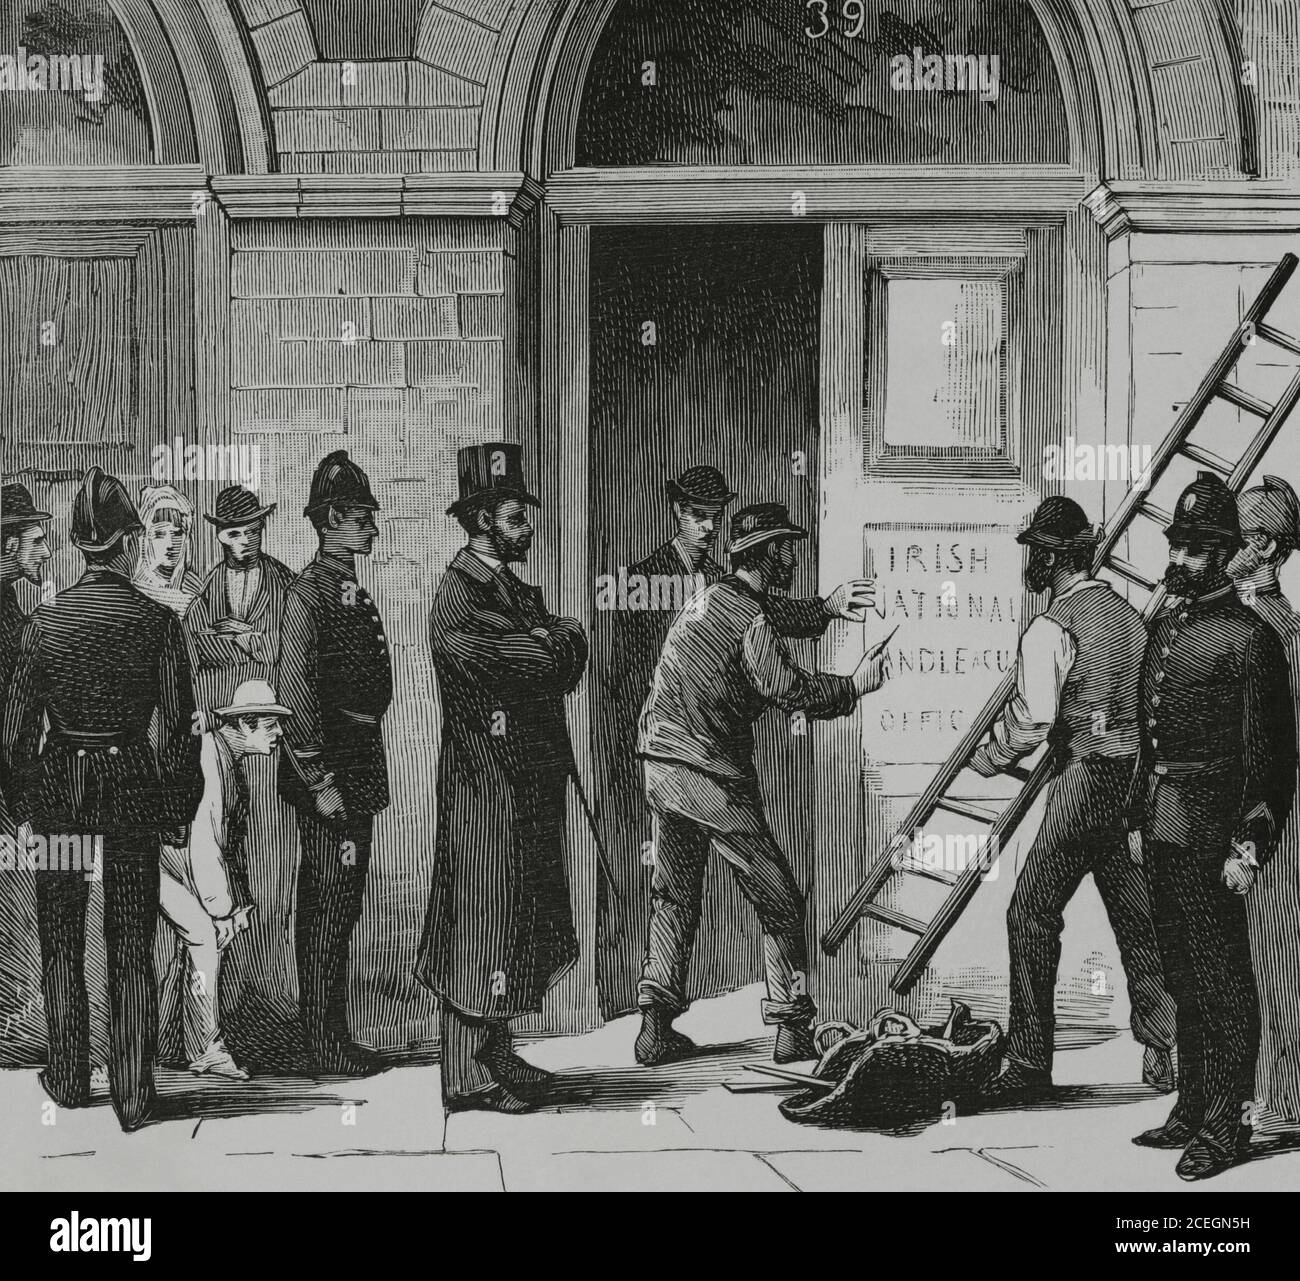 Ireland, Dublin. Agrarian agitation. Law enforcement officers removing the inscription from the door of the Irish National Land League office at Sackville Street 39. Engraving. La Ilustracion Española y Americana, 1881. Stock Photo